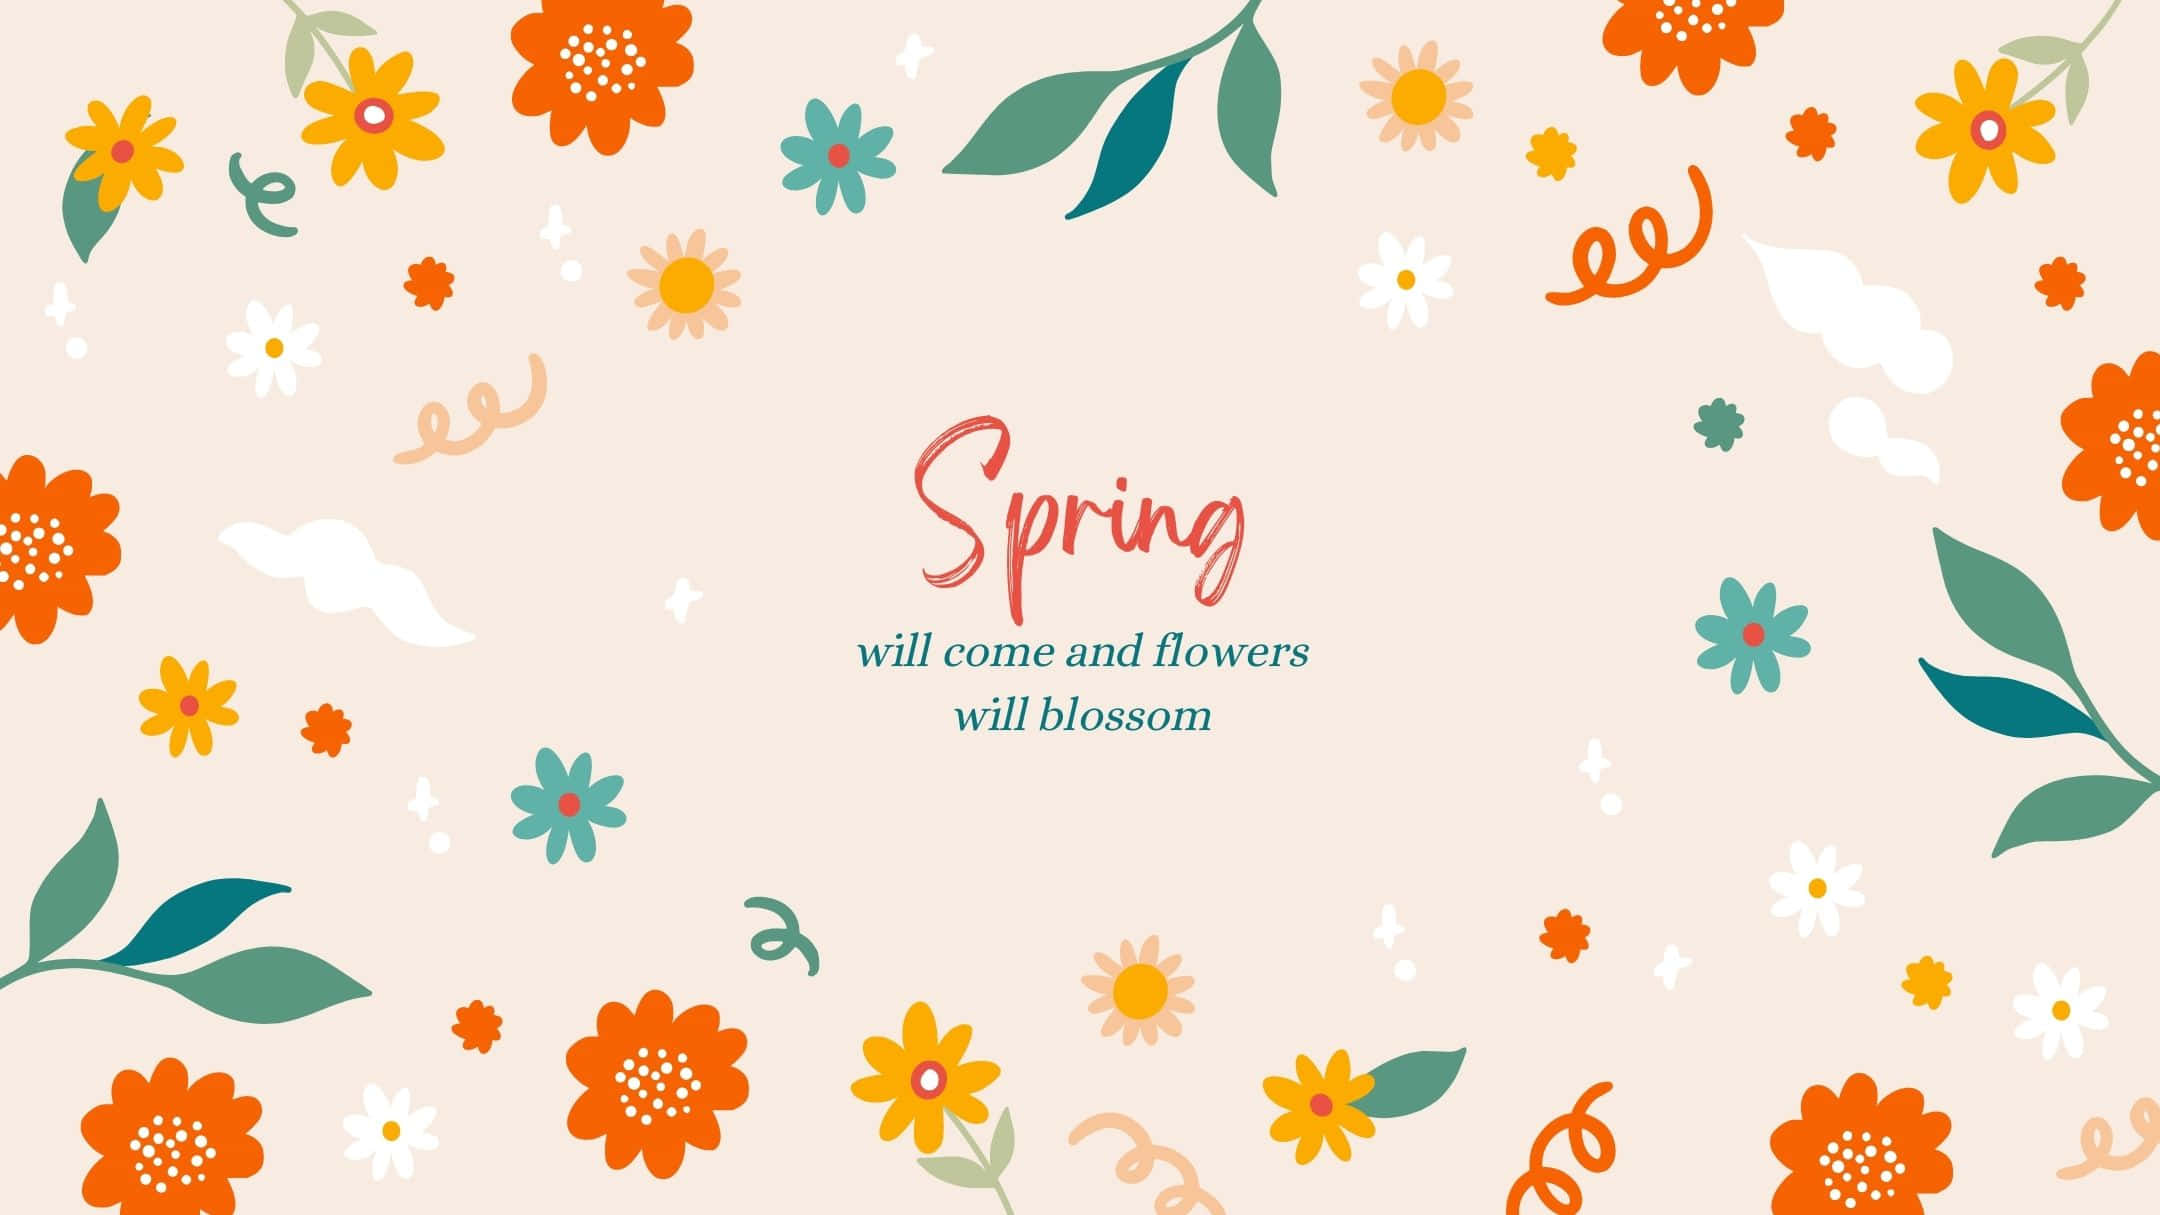 Best Spring Background With Inspiring Quote